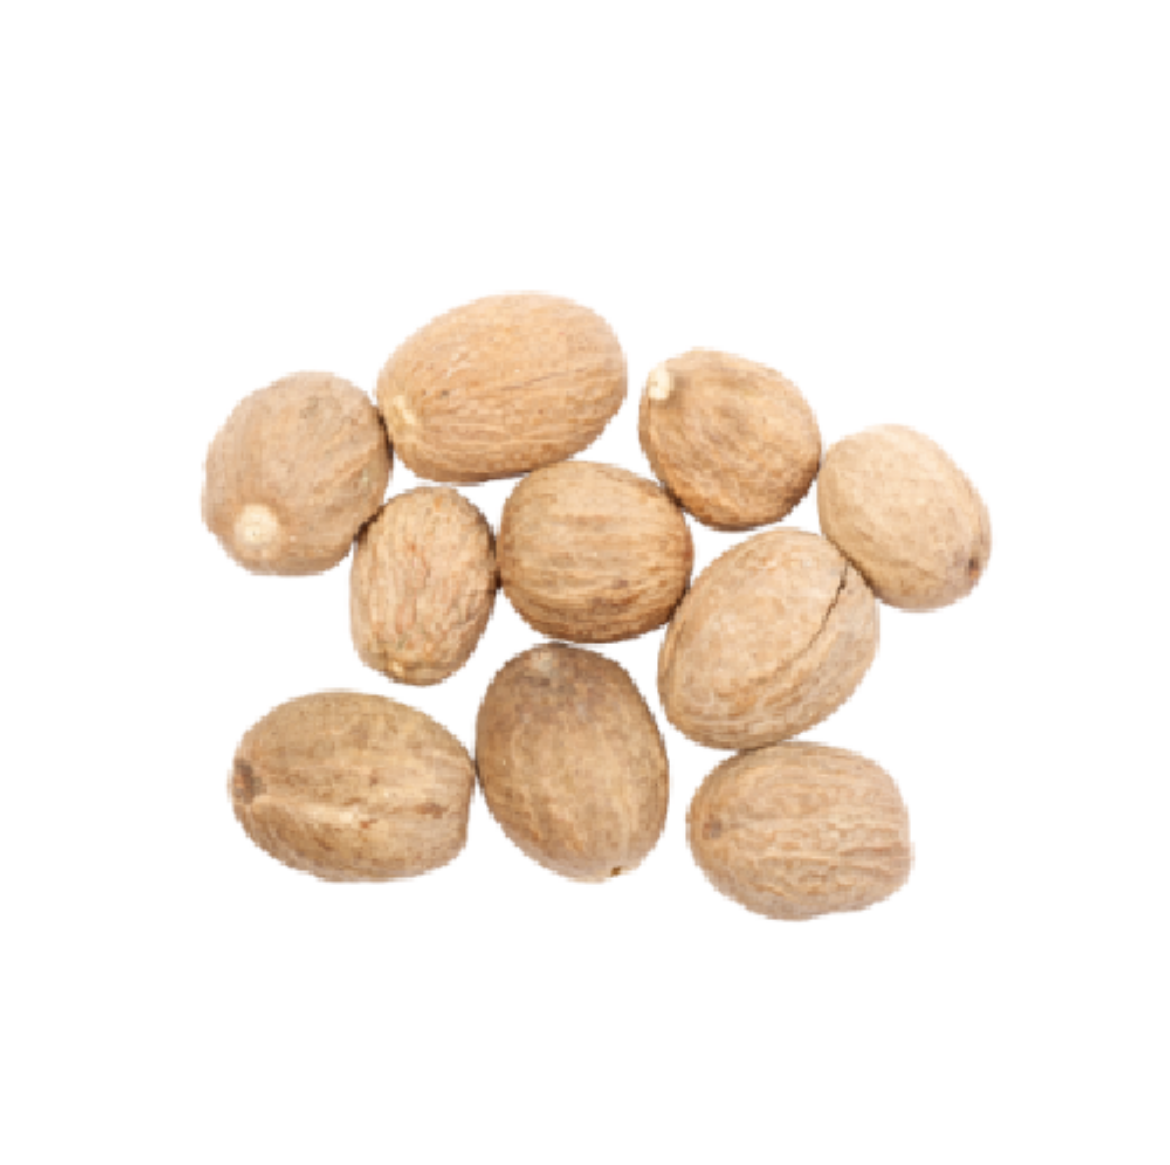 Picture of 1KG WHOLE NUTMEG (H)